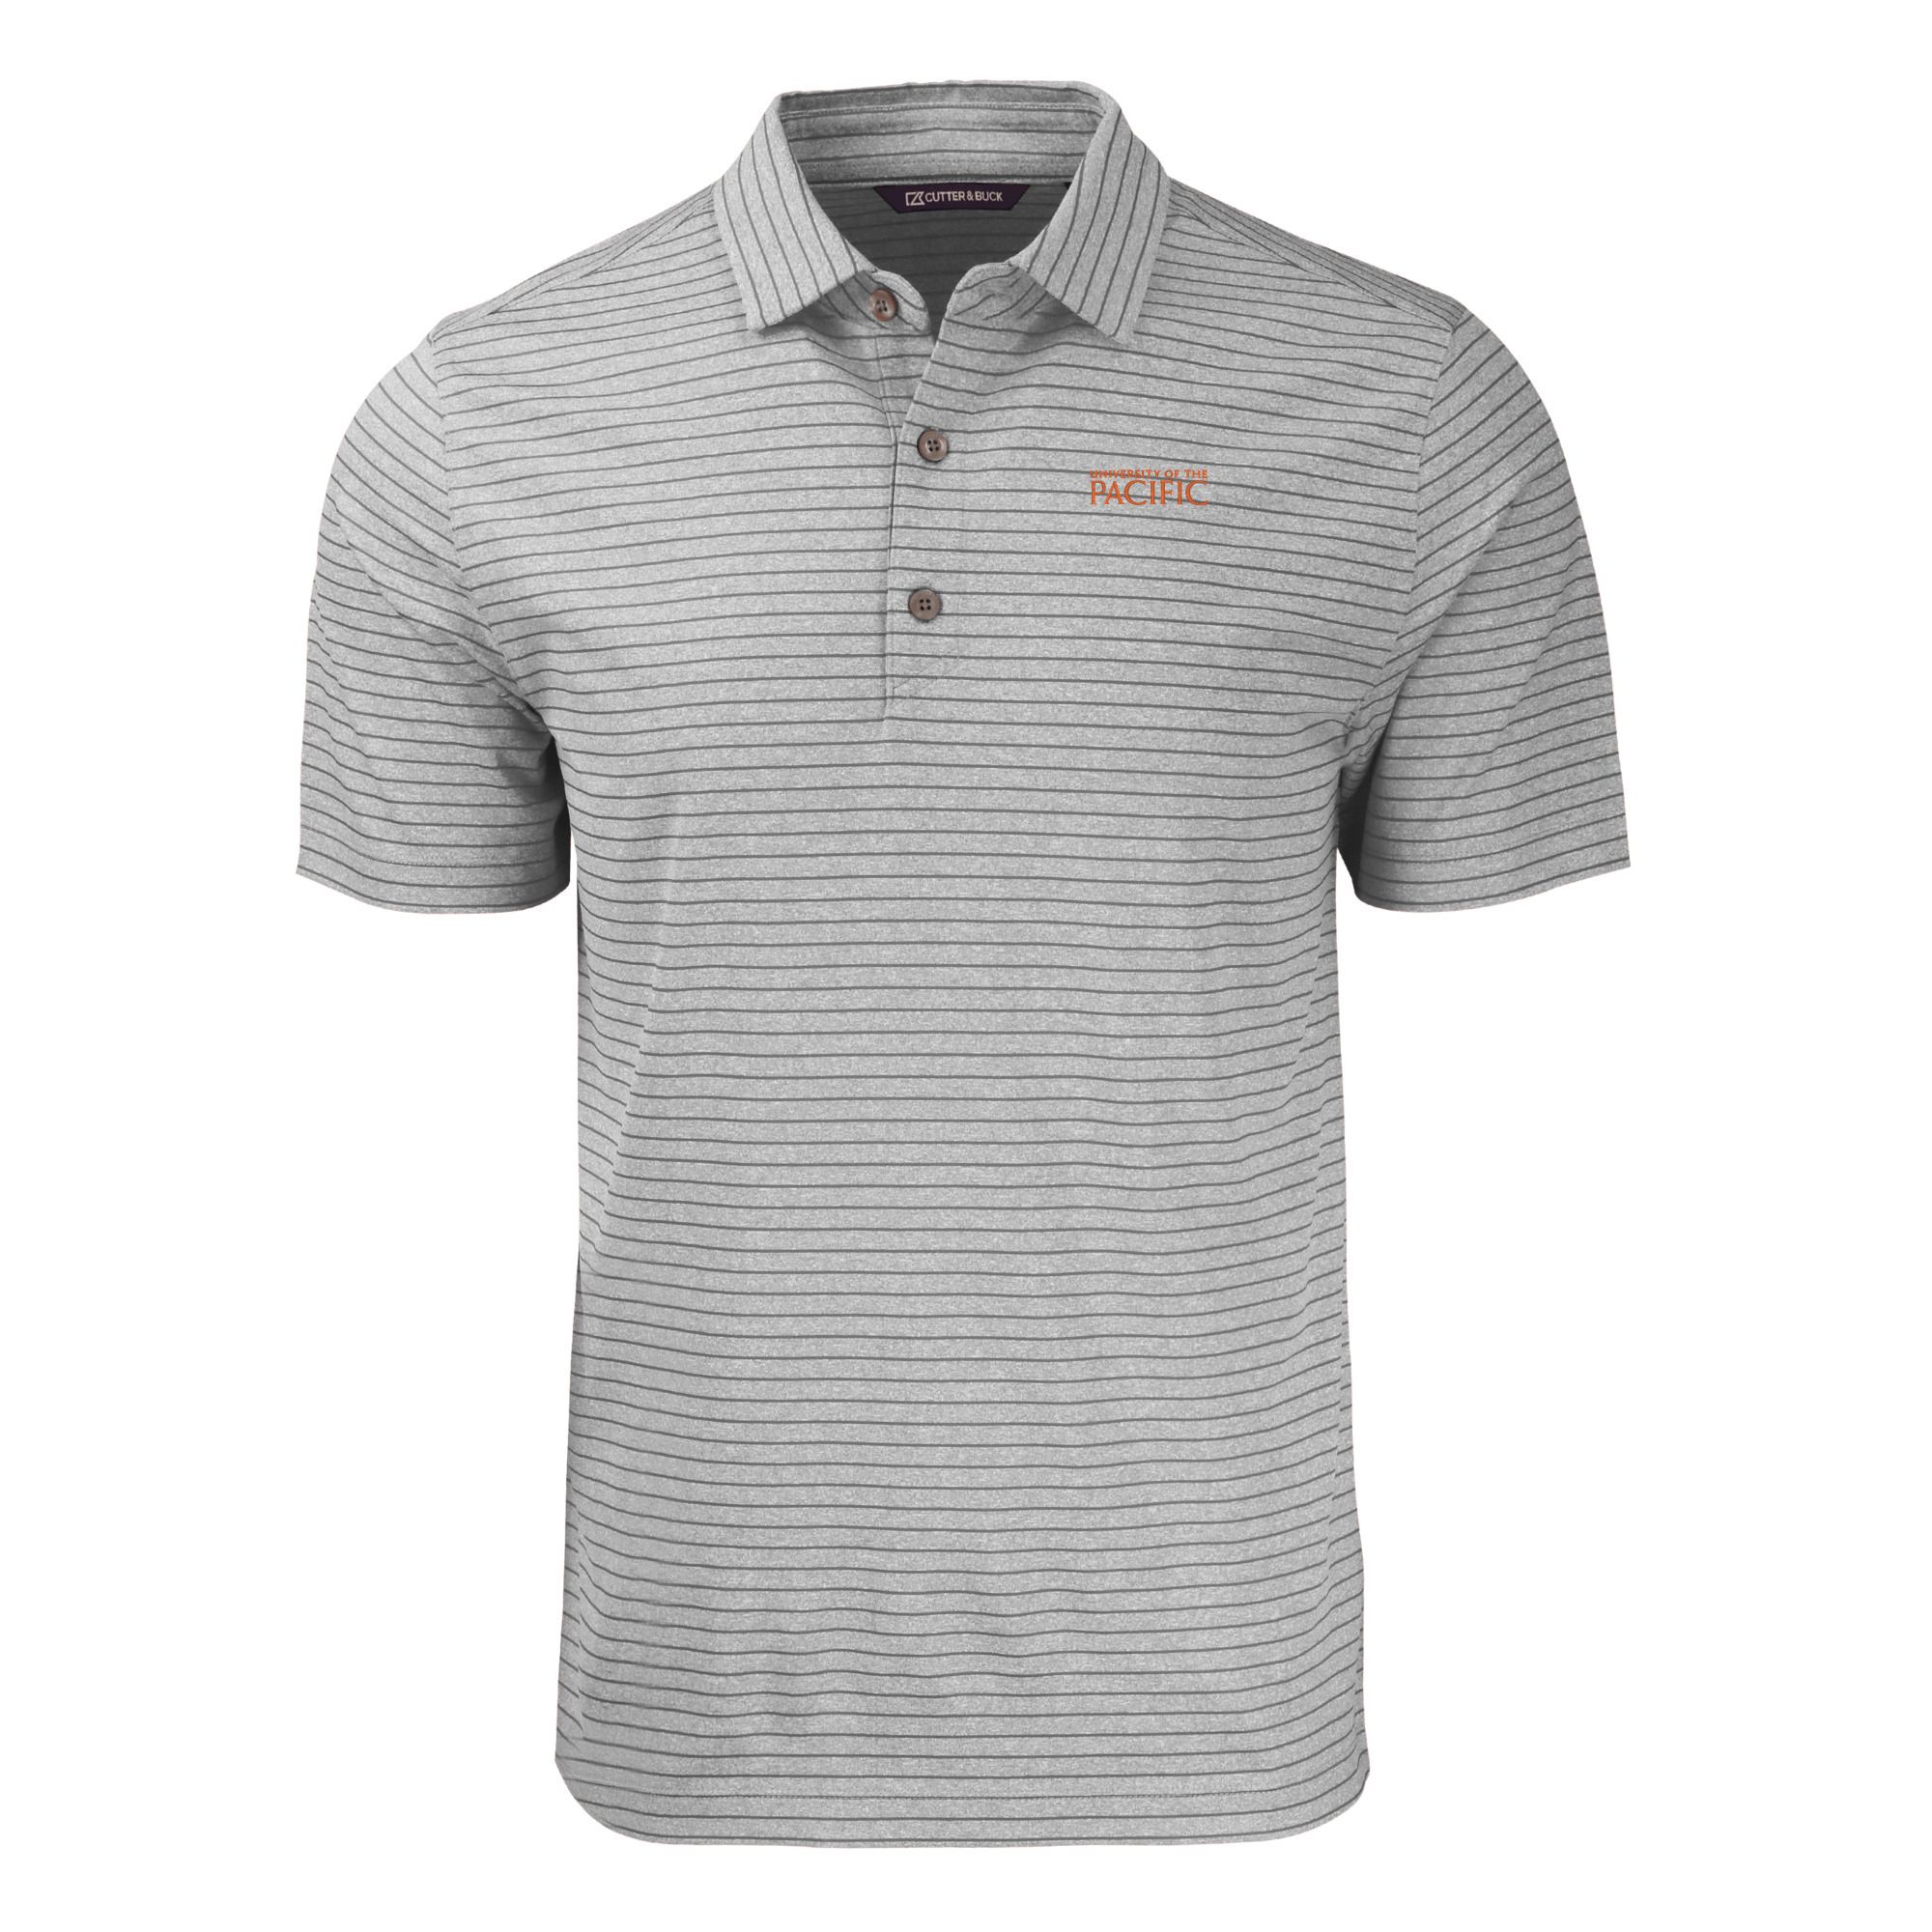 Men's Cutter & Buck  Heather Gray Pacific Tigers Big & Tall Forge Eco Heather Stripe Stretch Recycled Polo - image 2 of 3